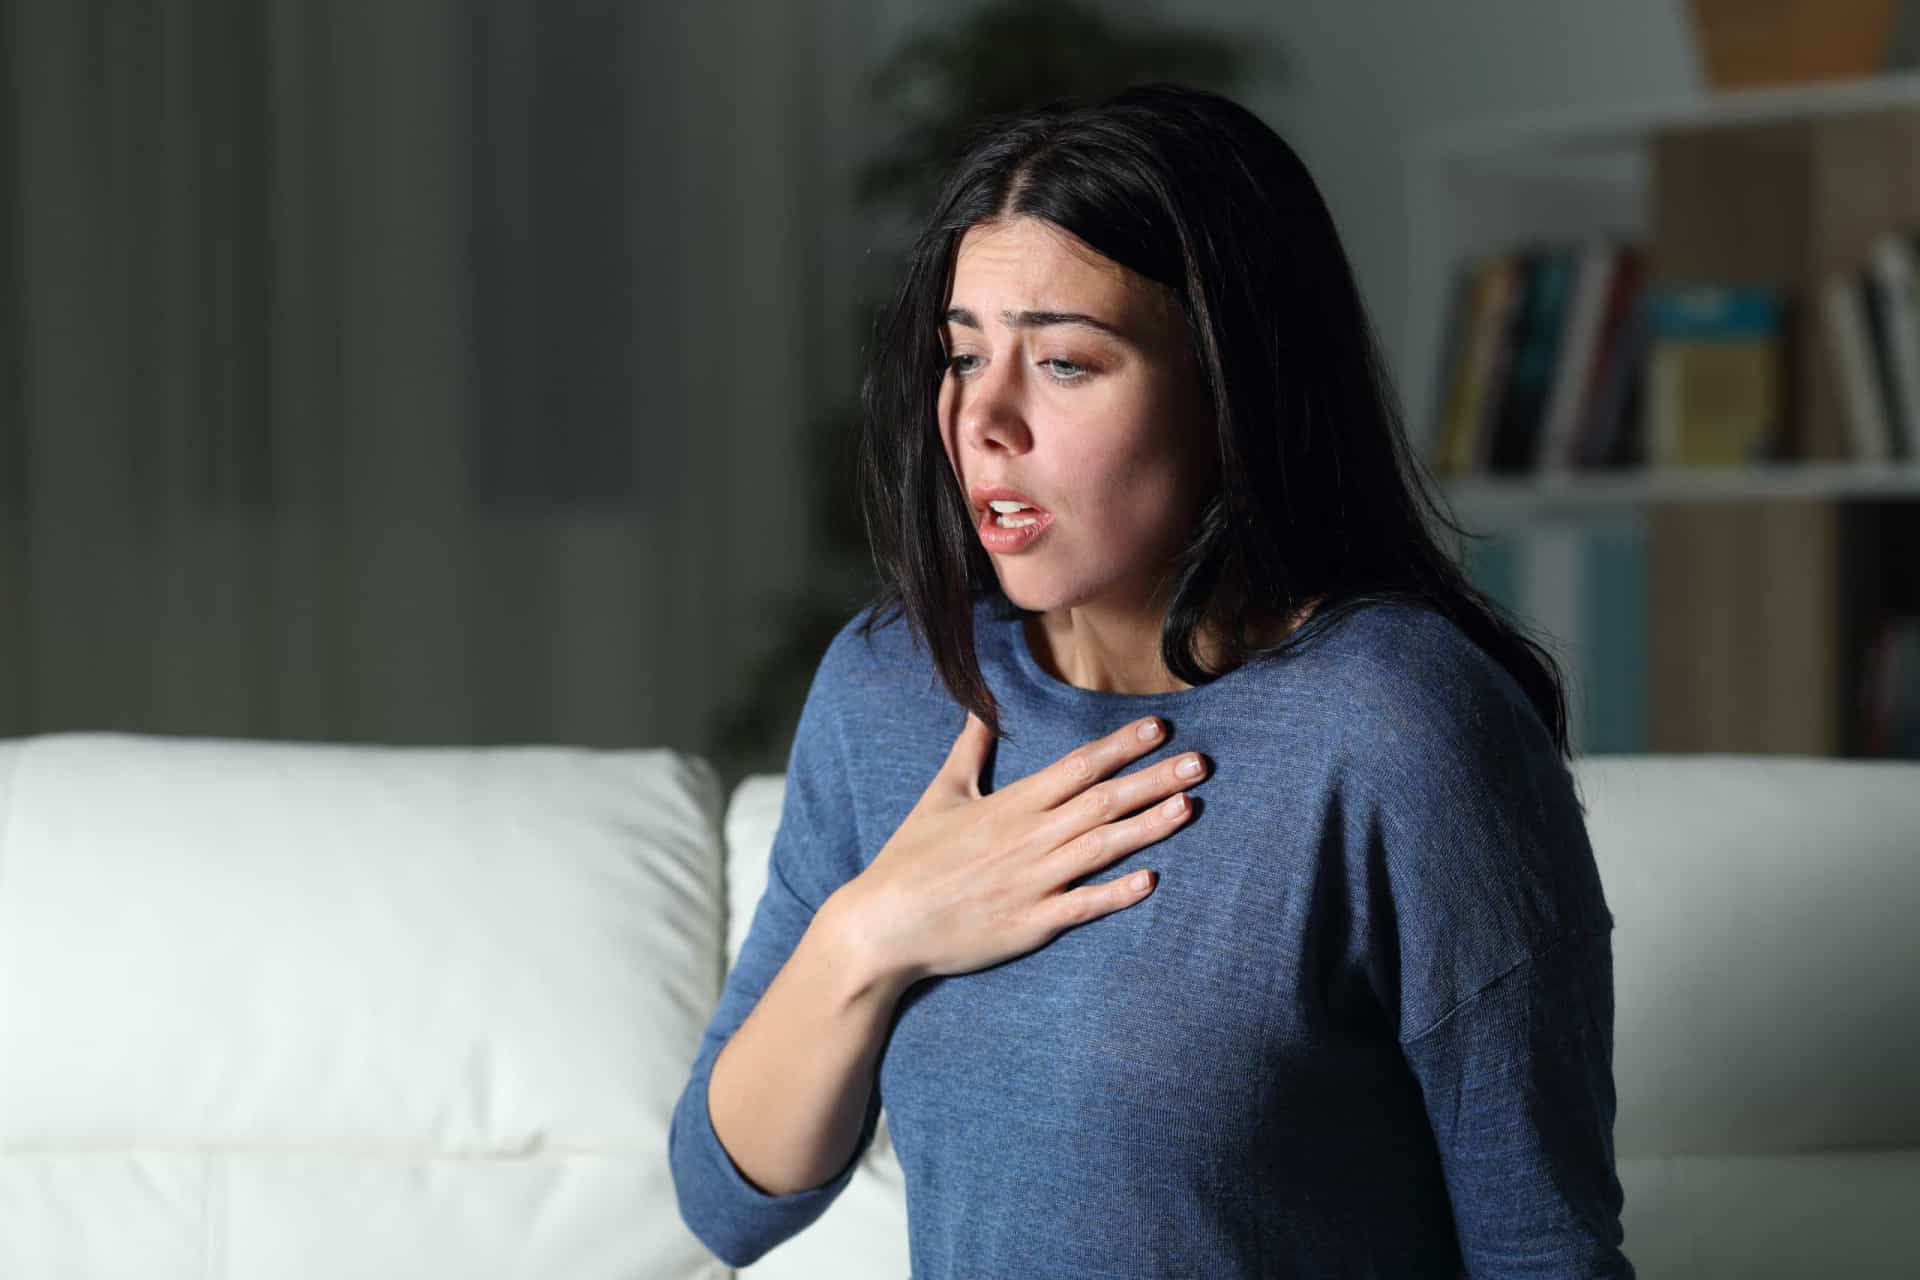 <p>Common and lengthy bursts of intense, localized pain known as "crises" are also common in those with SCD. Crises occur when a certain part of the body becomes severely deprived of oxygen for a time. The pain can be excruciating, and last for up to a full week with no letting up.</p><p>You may also like: <a href="https://www.starsinsider.com/n/333991?utm_source=msn.com&utm_medium=display&utm_campaign=referral_description&utm_content=513786en-en">Stars who suffer from rare diseases</a></p>